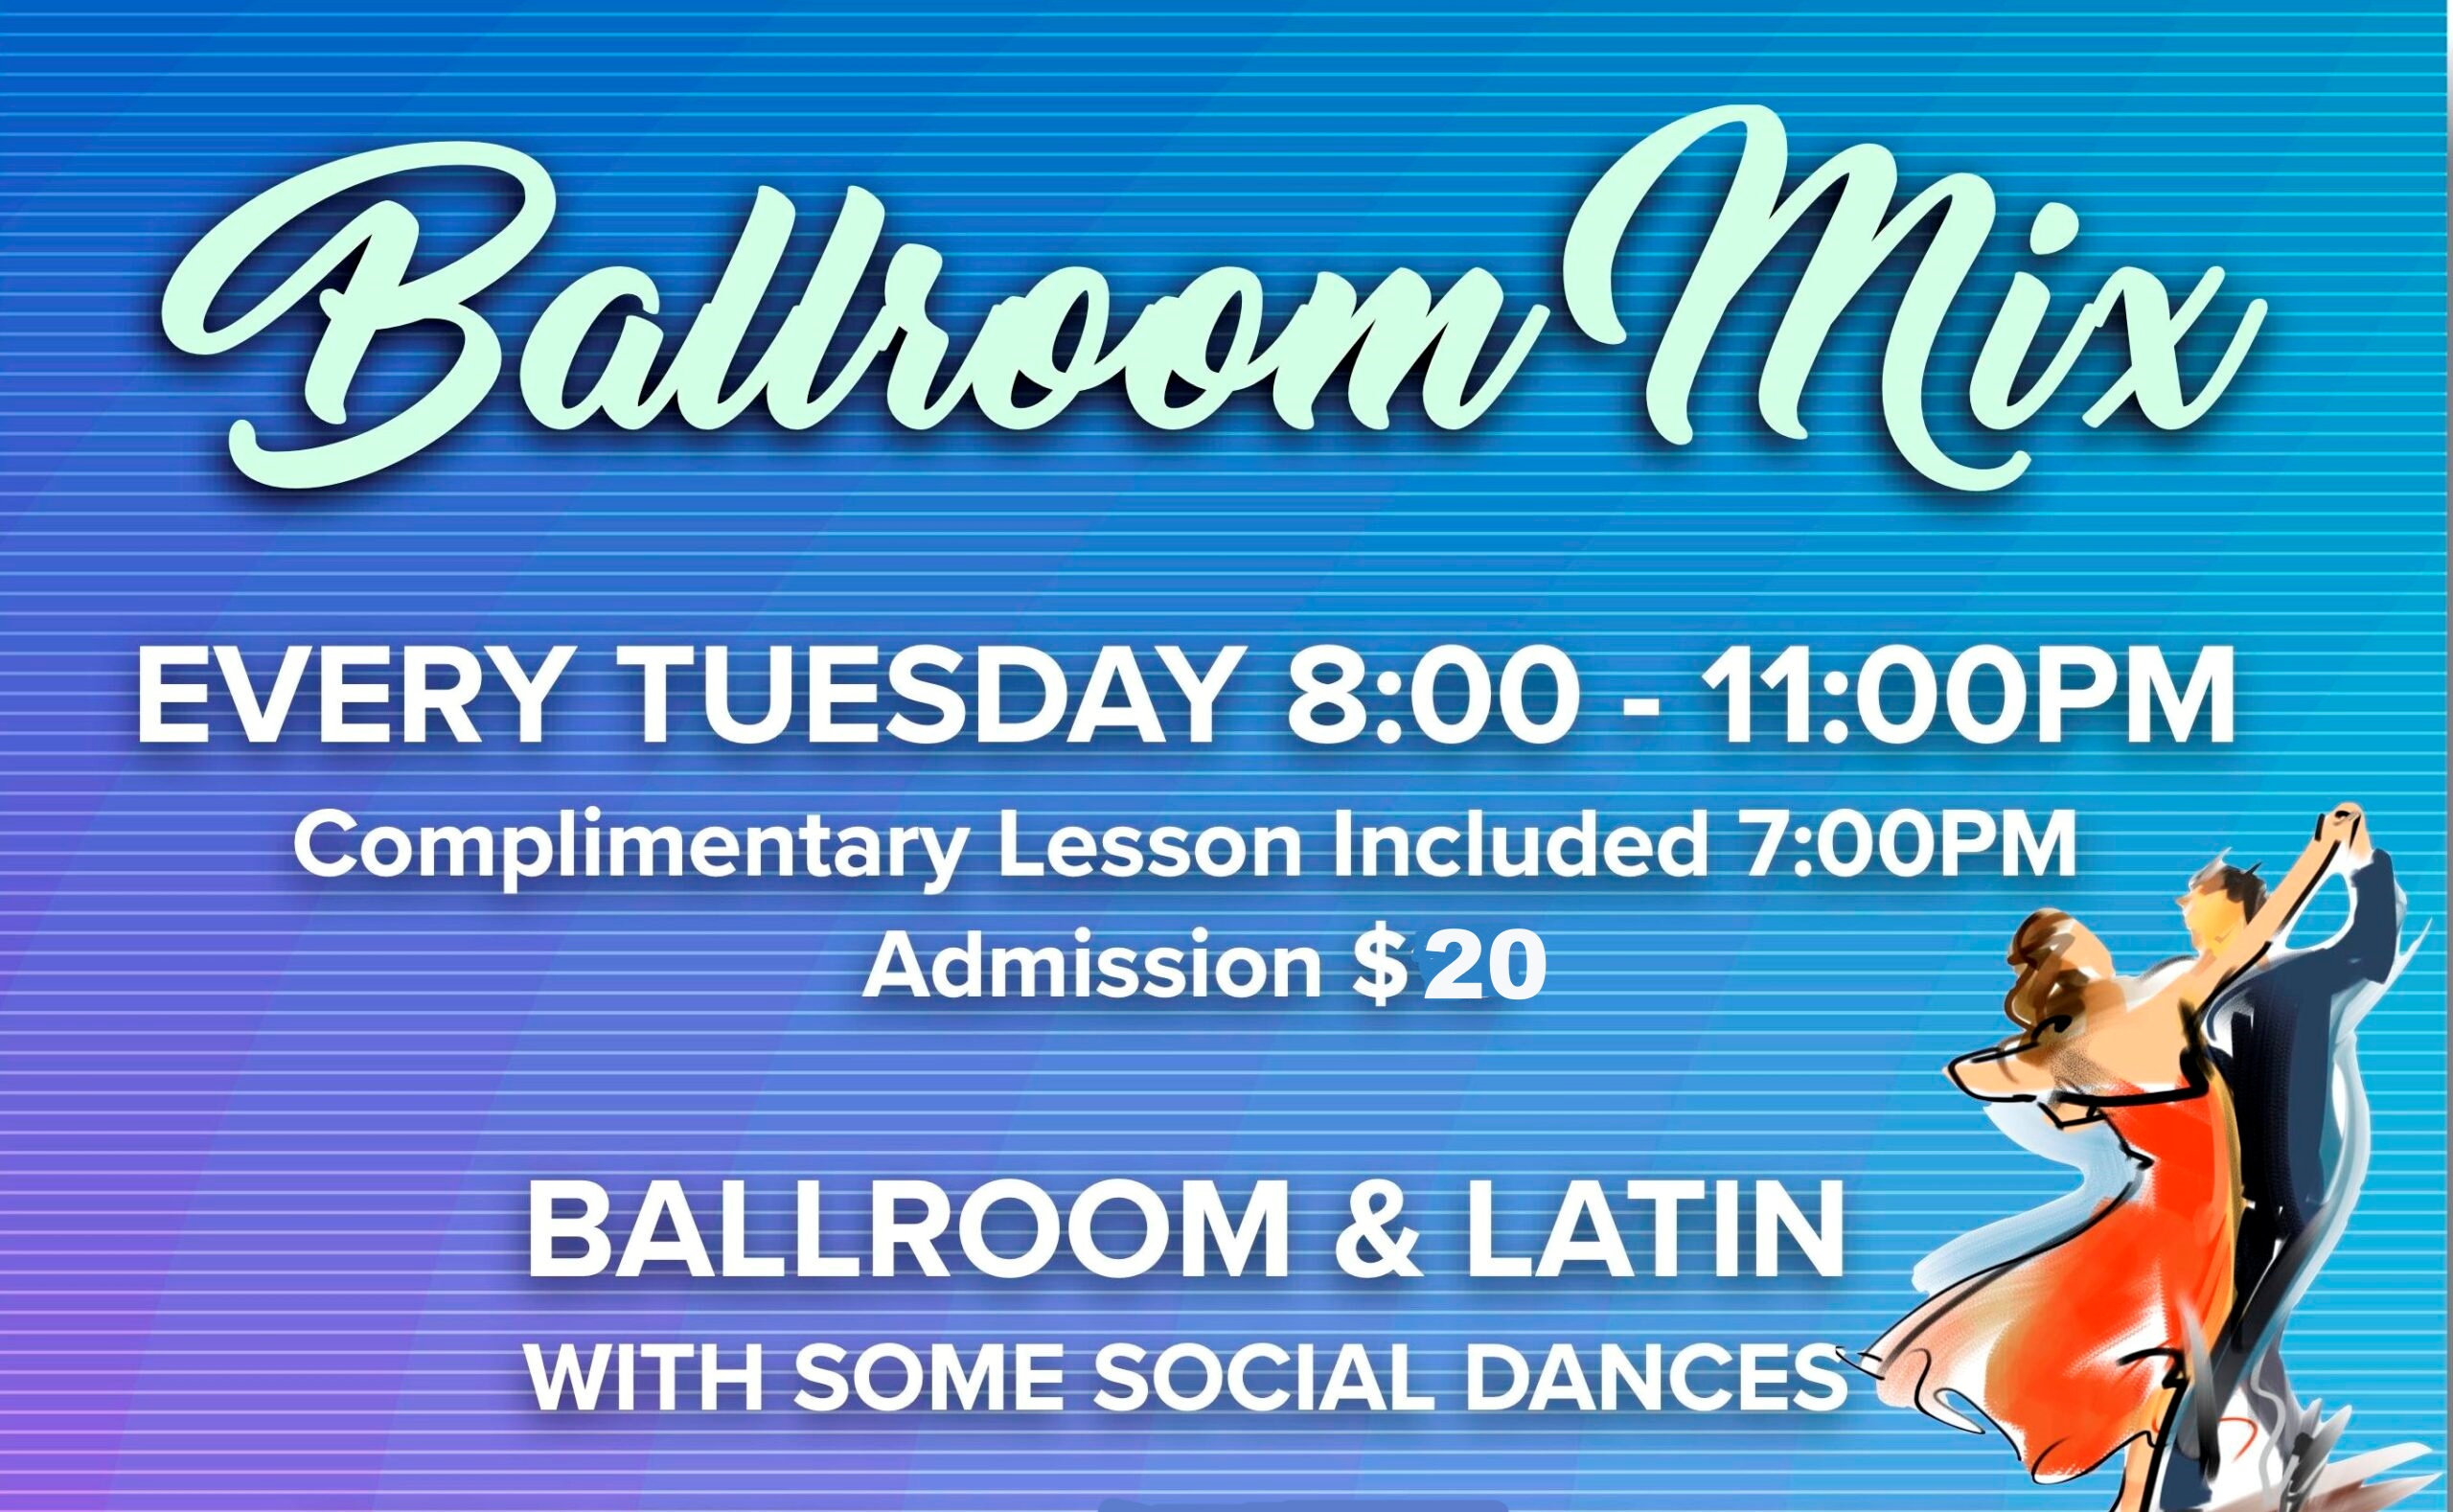 Ballroom & Latin Mix Every Tuesday Night at 8 PM at Goldcoast Ballroom! - Plus Complimentary Group Class at 7 PM! - $20 Whole Evening